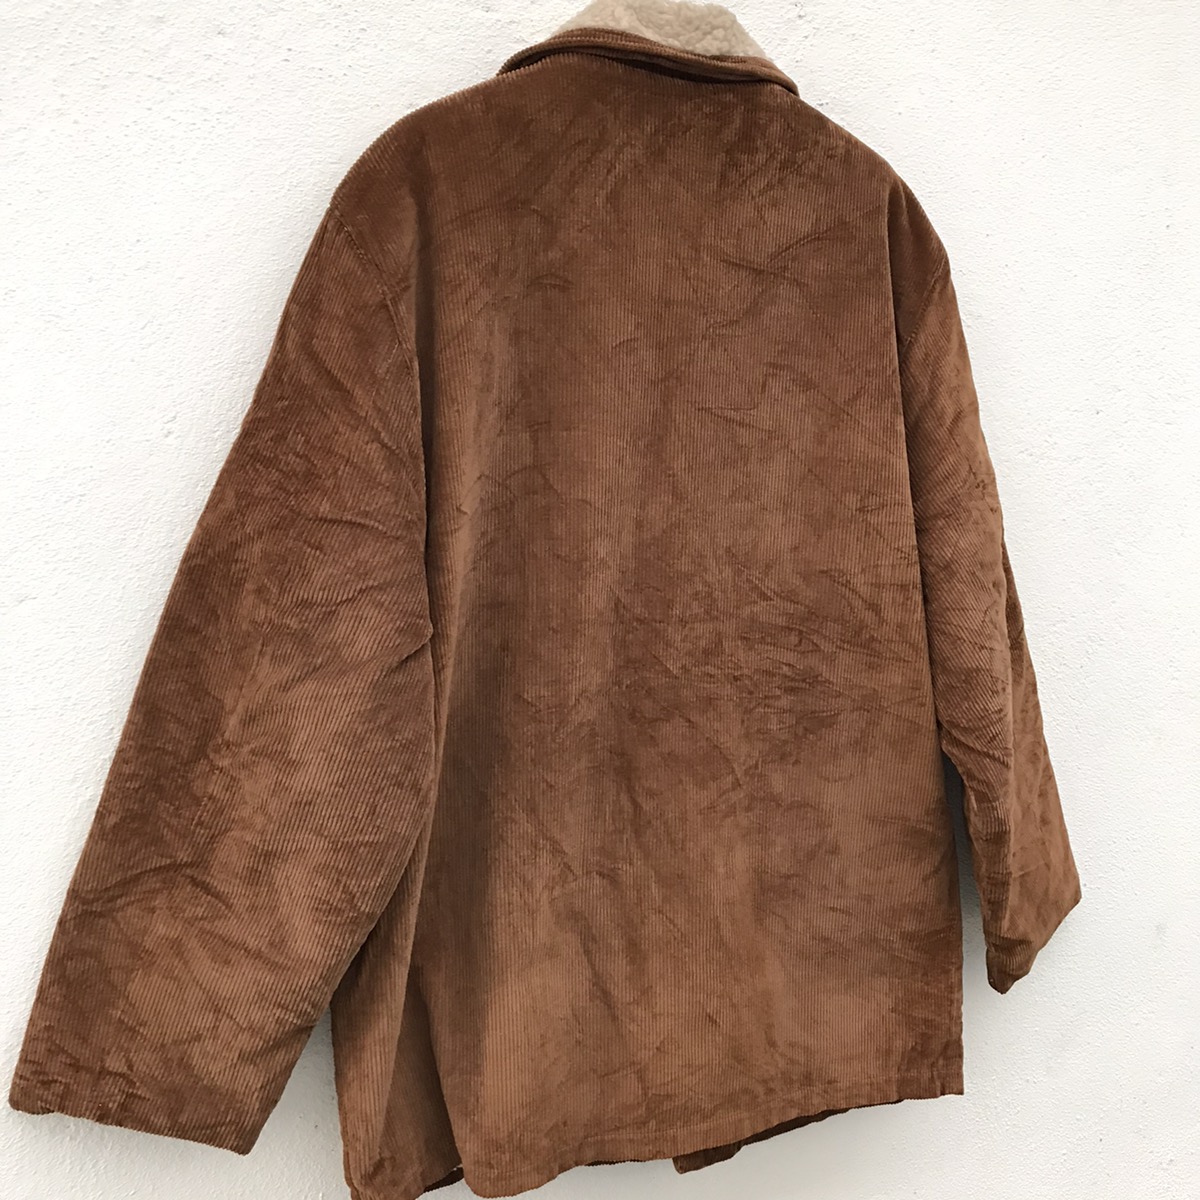 Vintage - Canyon Guide Outfitters Corduroy Jackets - 7